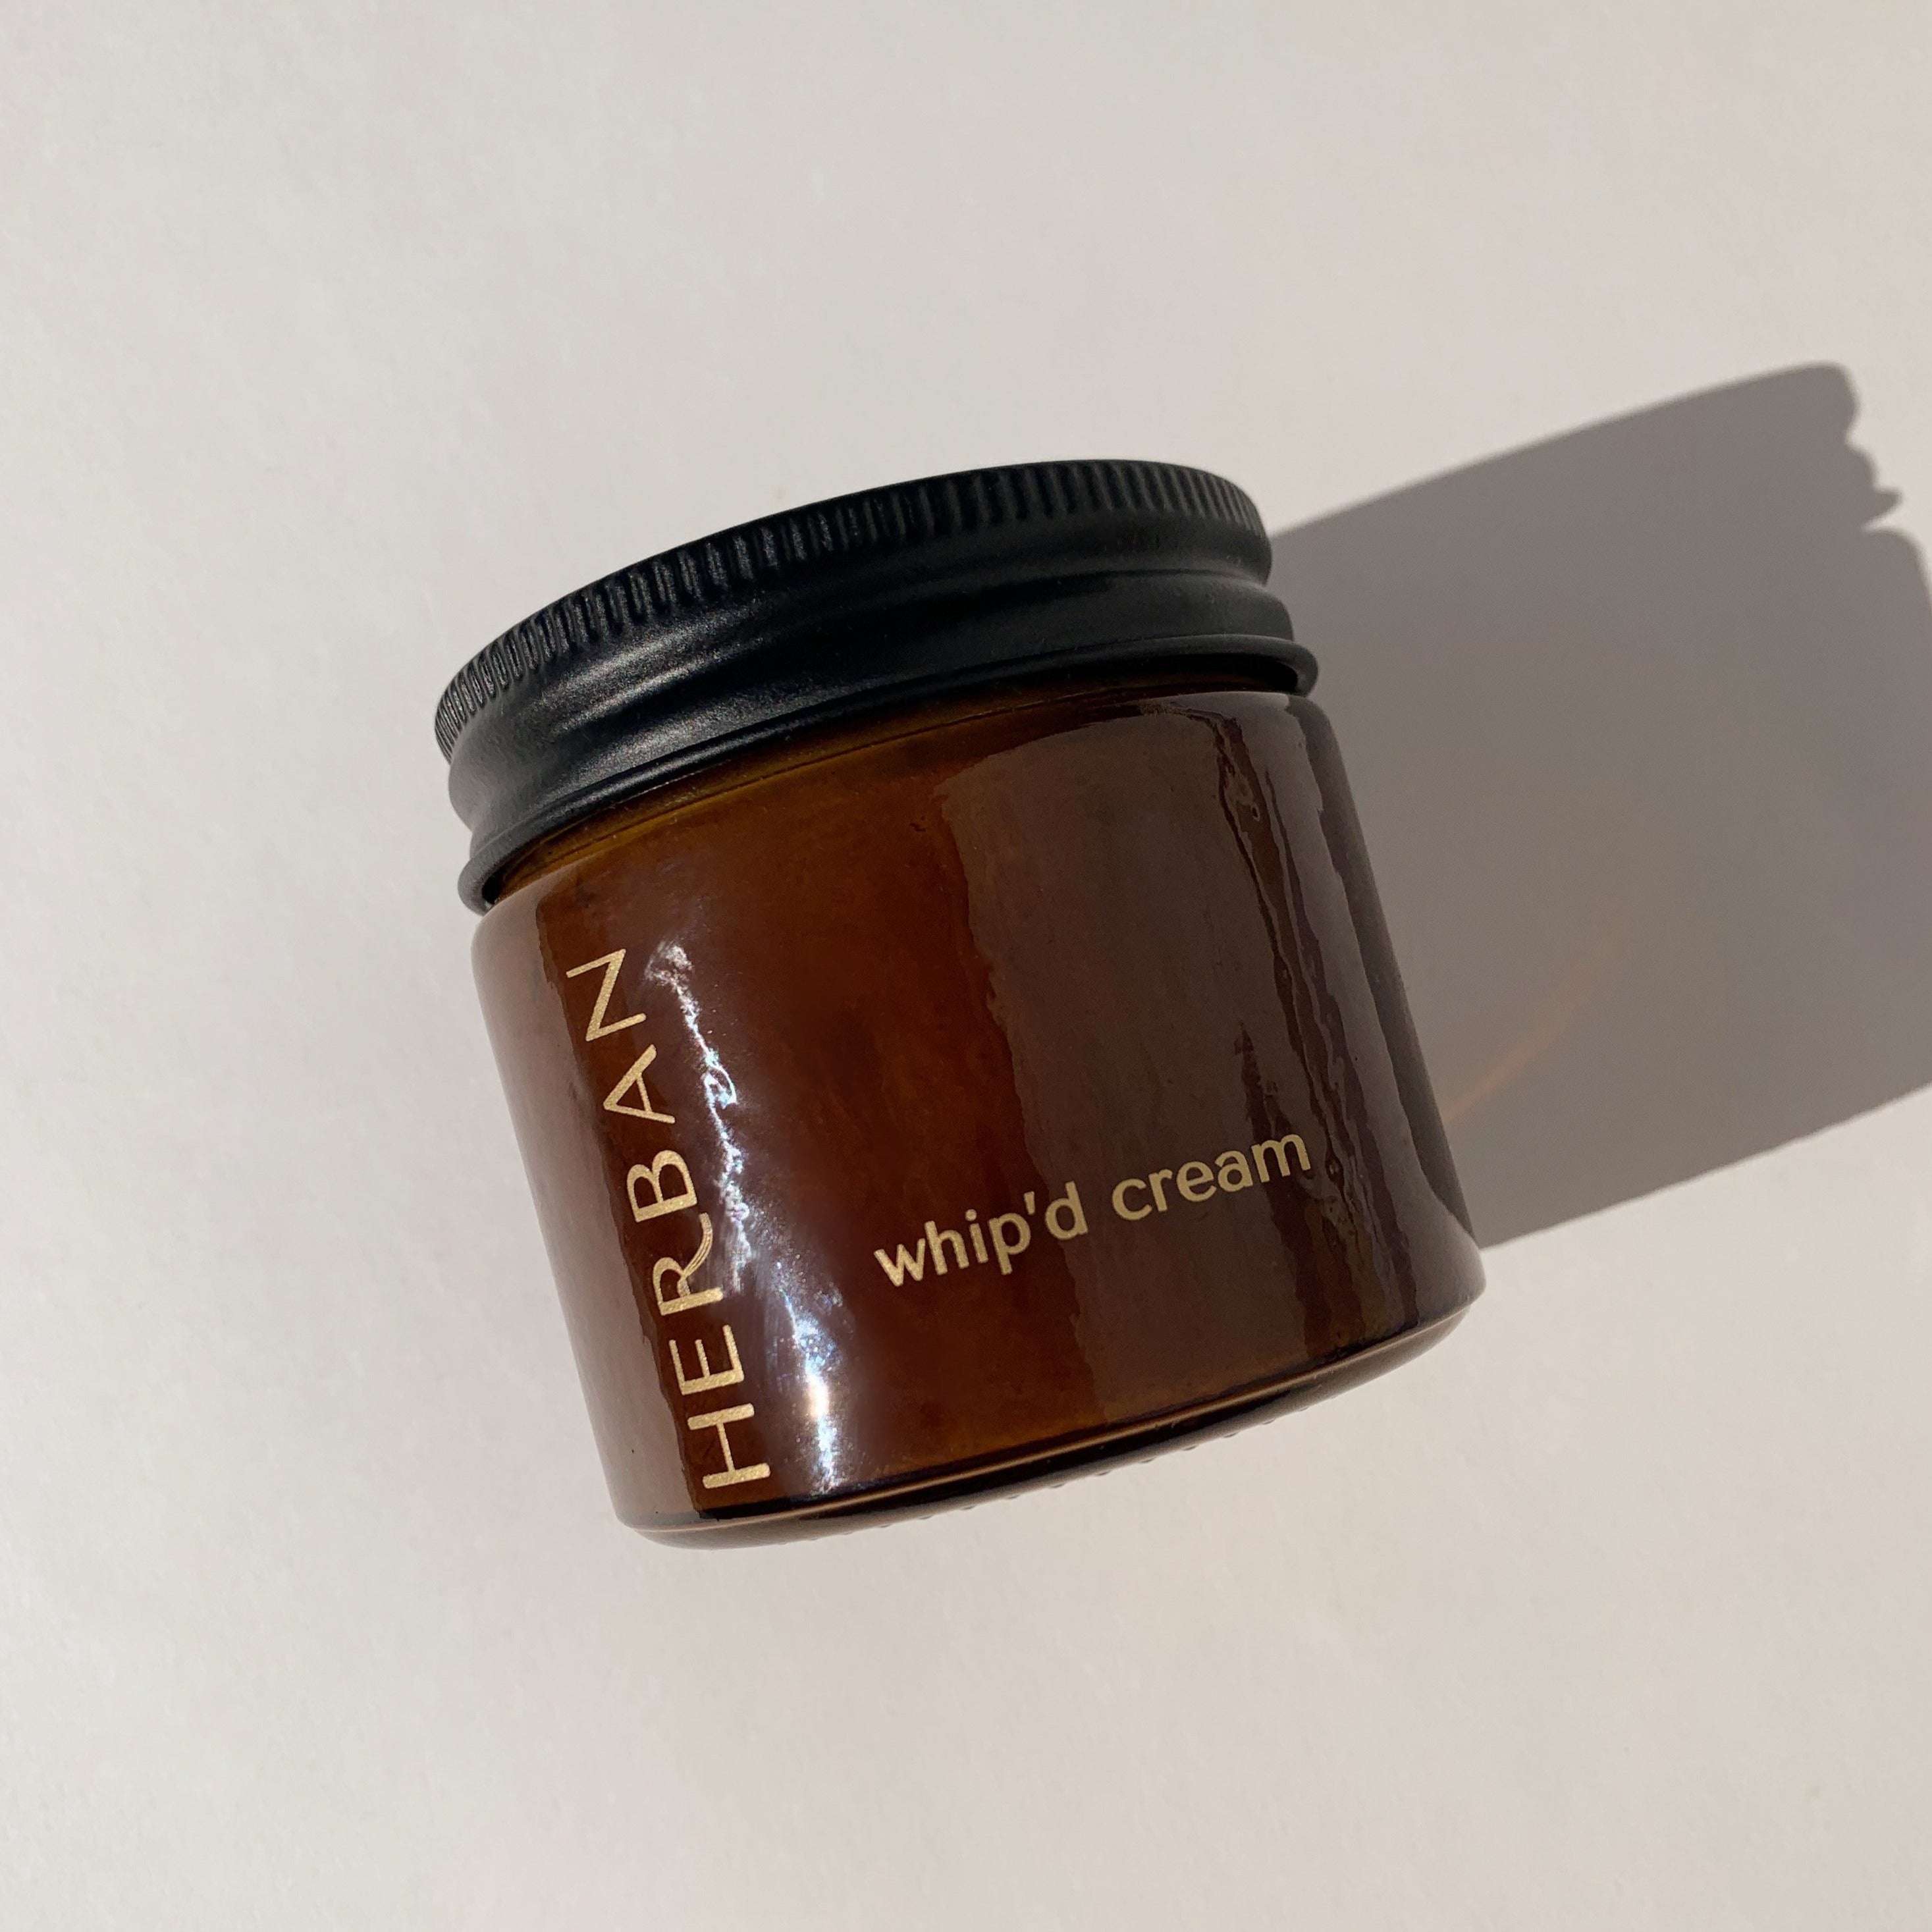 Herban’s Whip’d Cream total body lotion in a glass jar. Shea butter, fatty acids and vitamins A, E and F